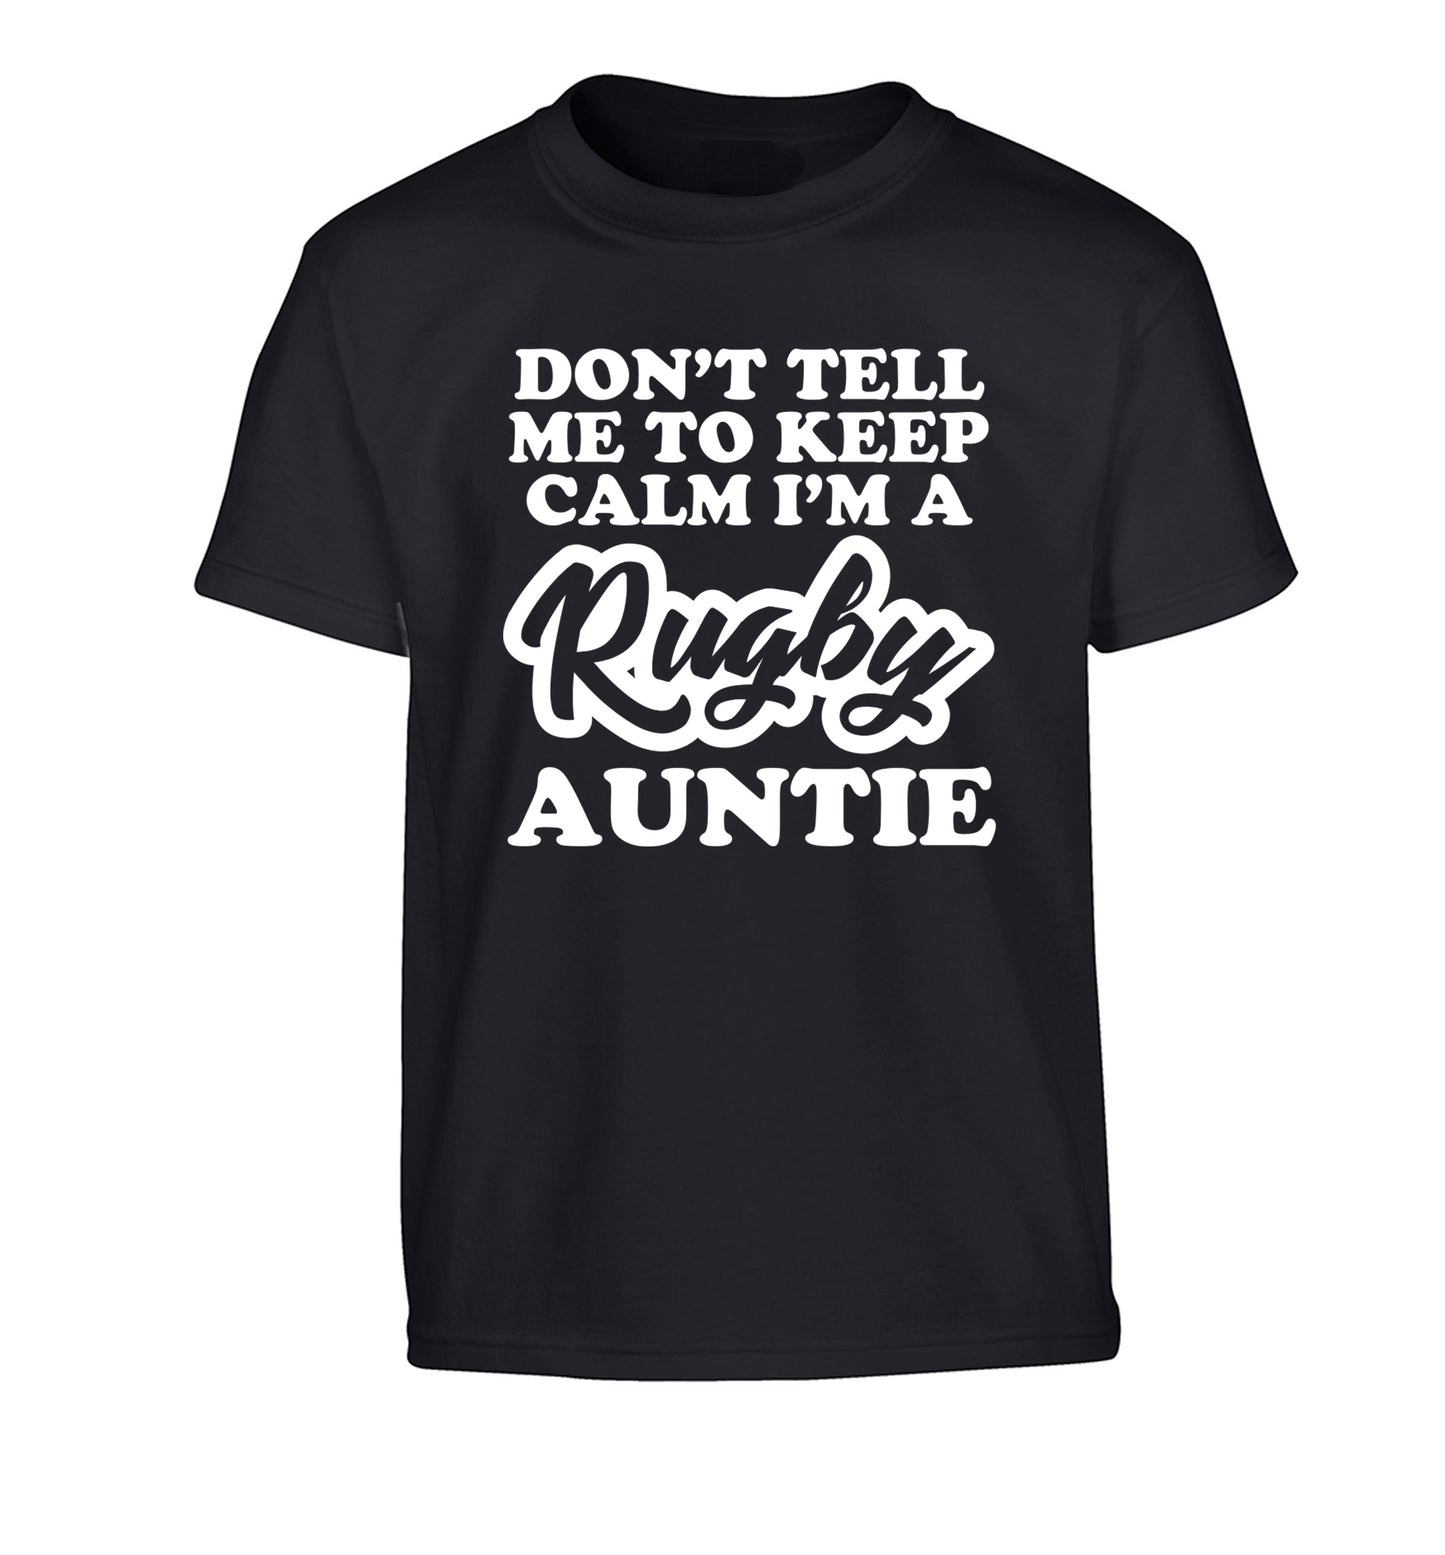 Don't tell me keep calm I'm a rugby auntie Children's black Tshirt 12-13 Years